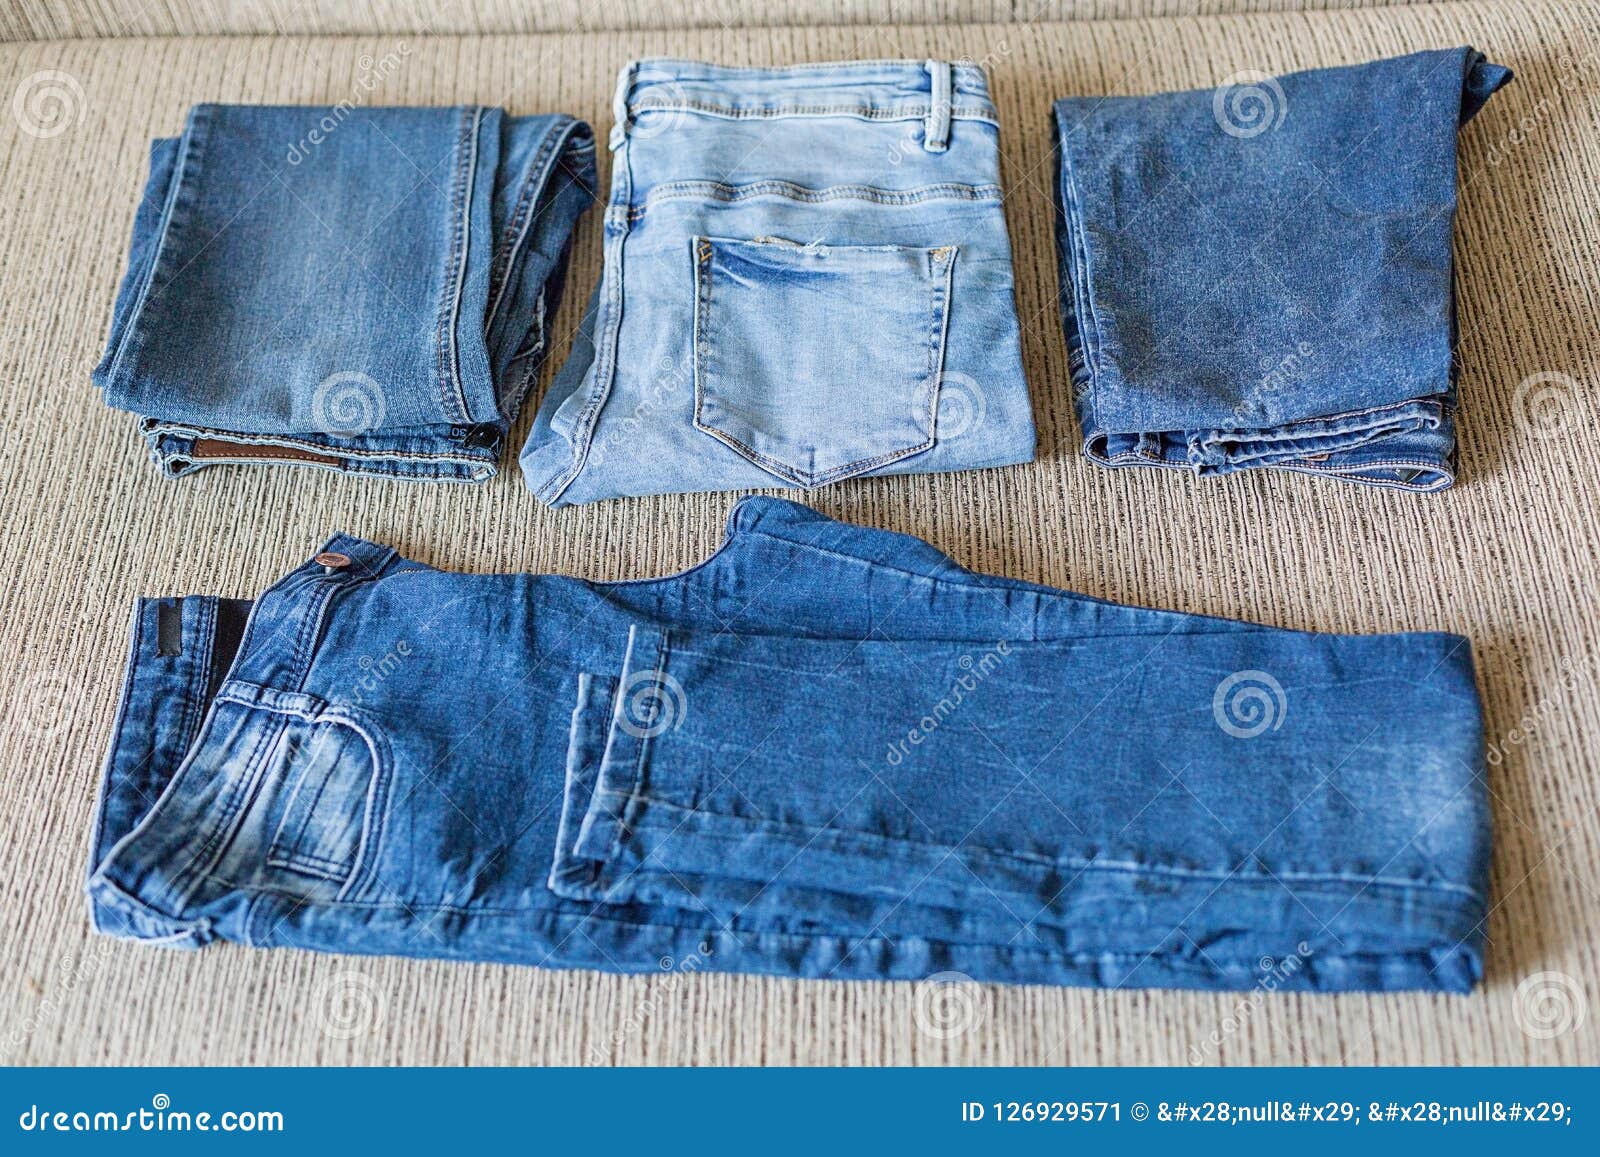 Denim Trends To Keep An Eye On In 2022 | Flipping Heck!